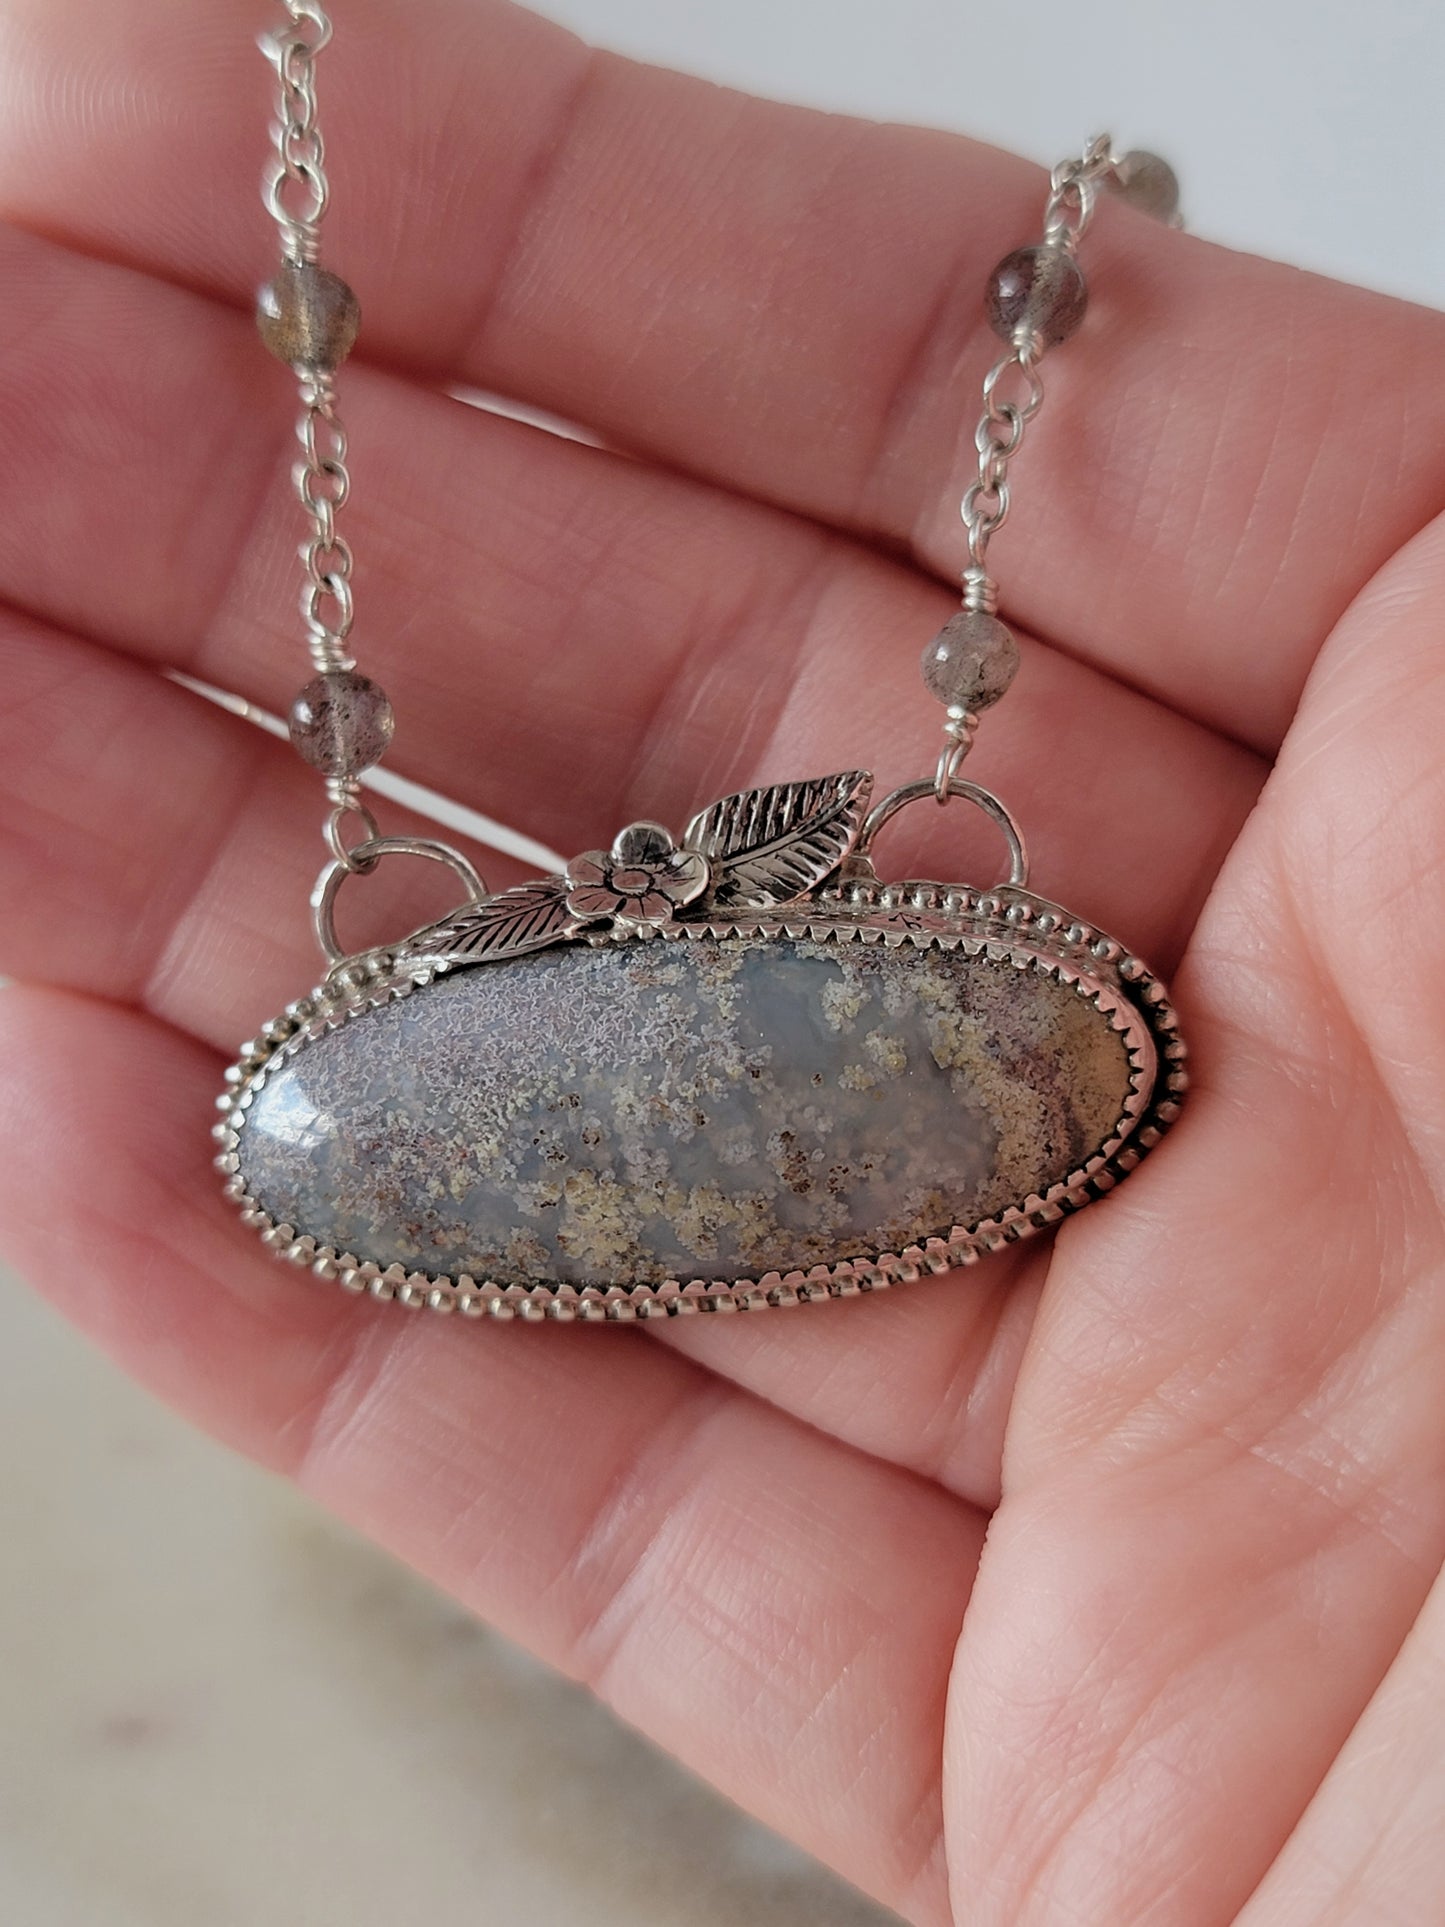 moss agate pendant with sterling silver flower and labradorite beads necklace | rare soul accessories jewelry